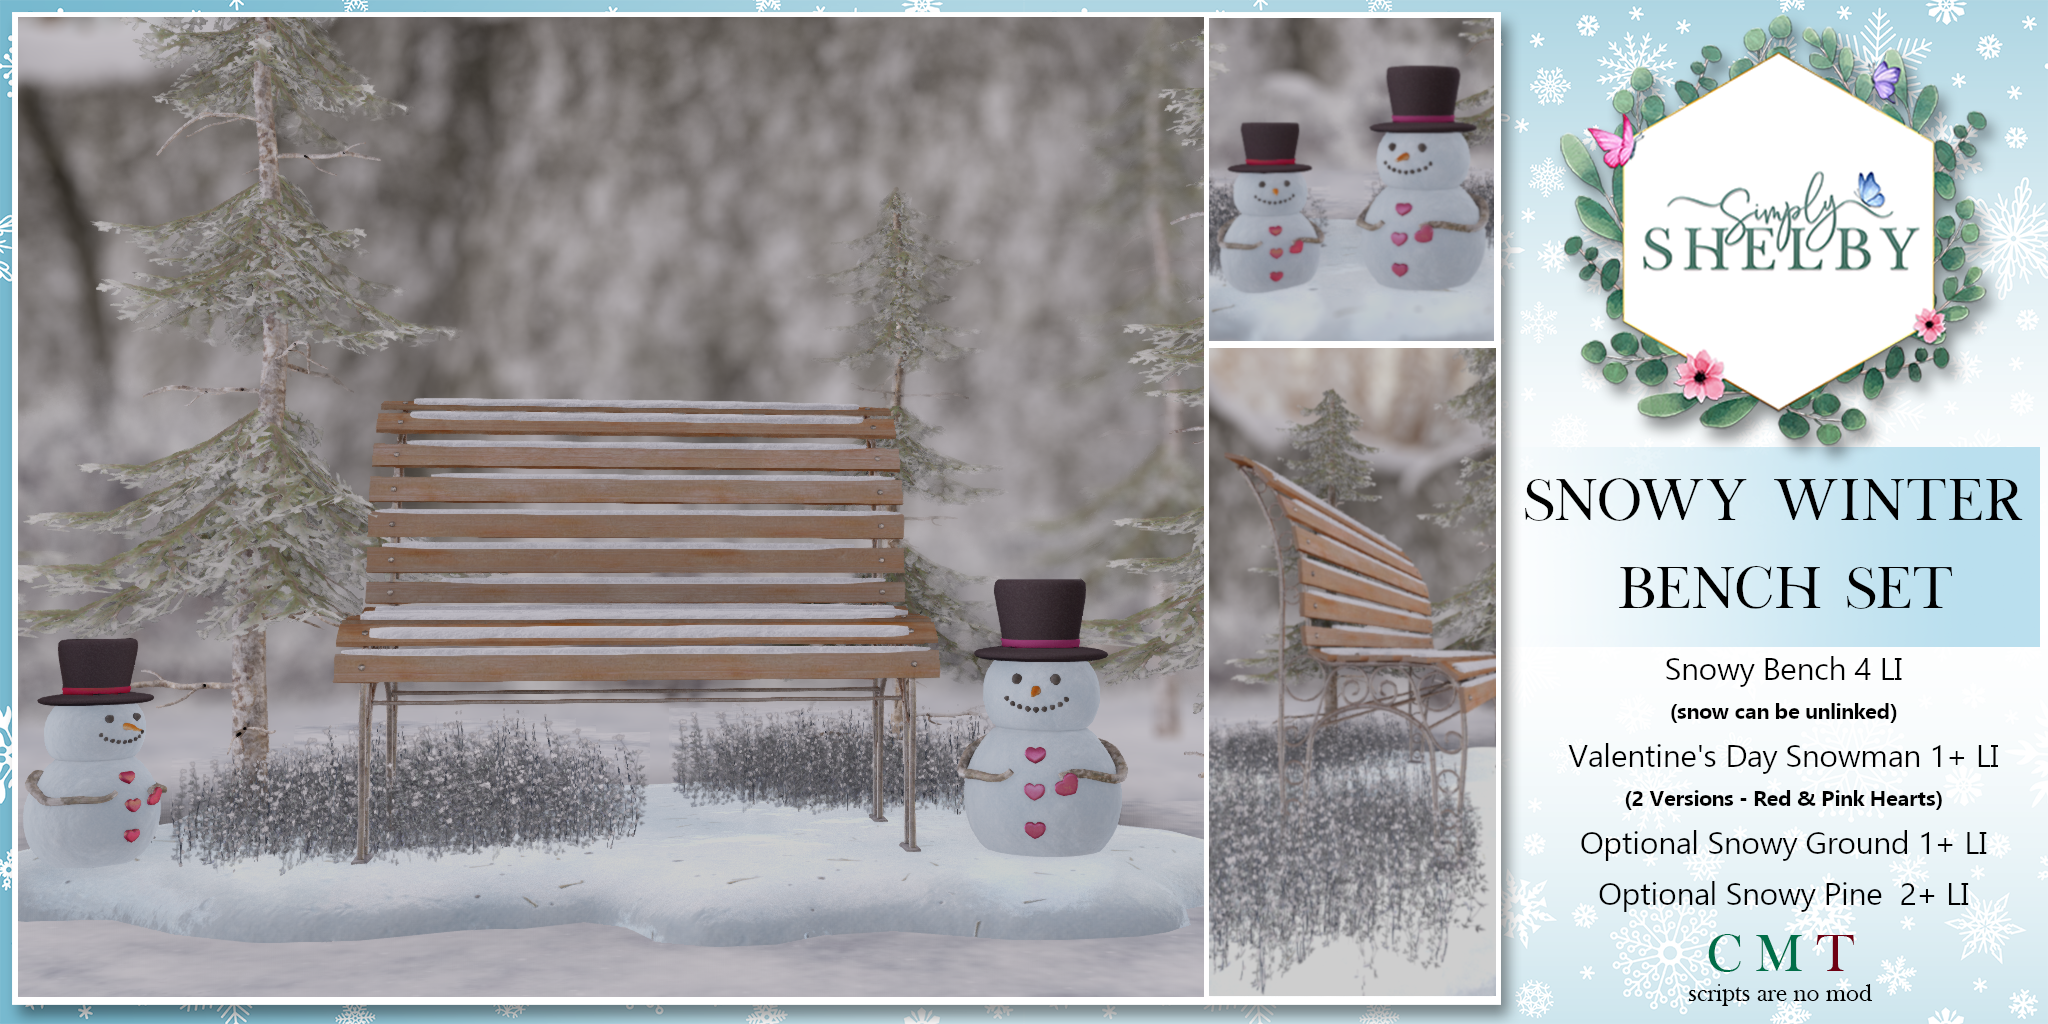 Simply Shelby – Snowy Winter Bench Set